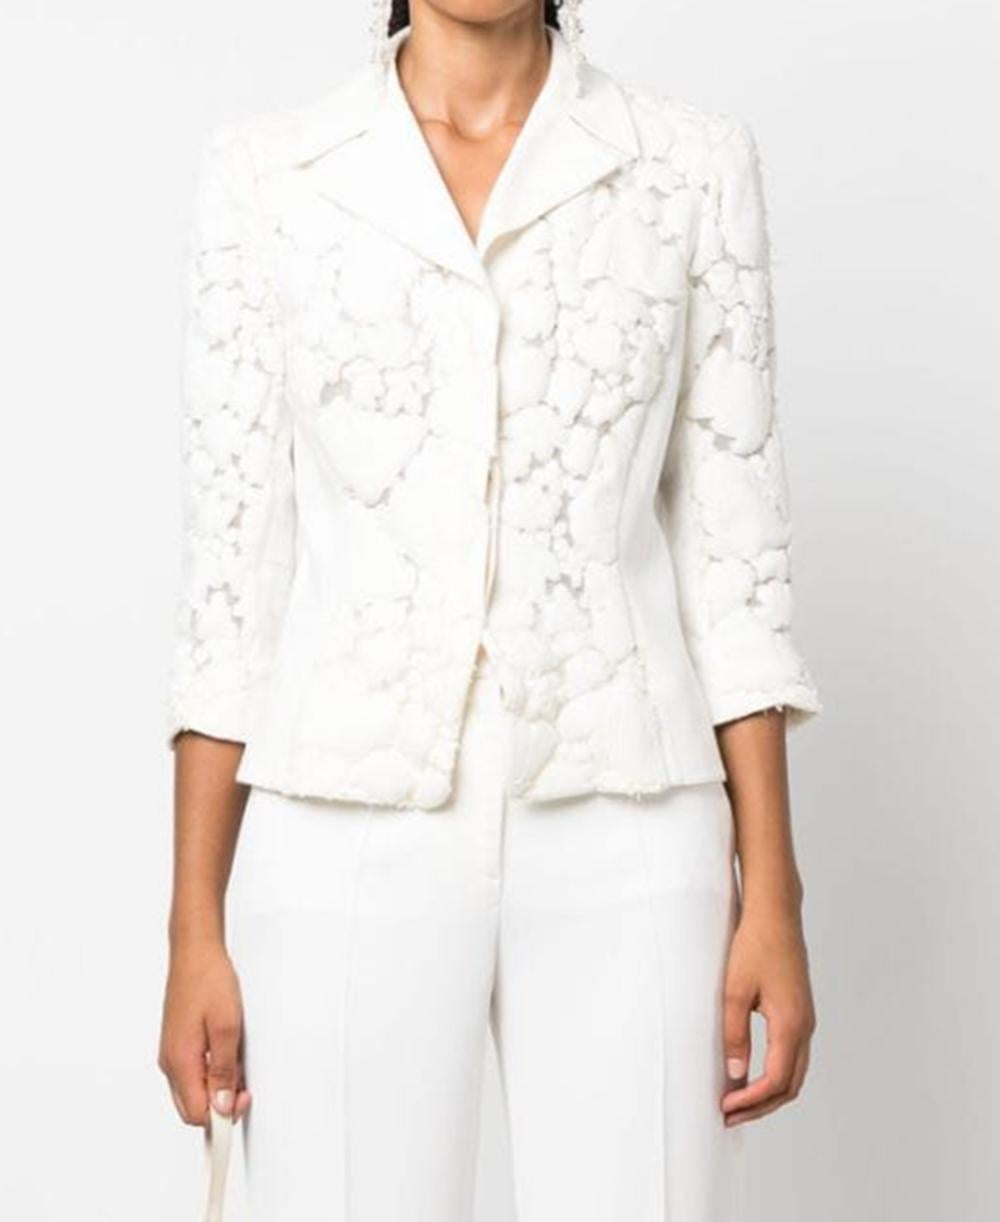 Thierry Mugler Couture white three-quarter sleeves panelled jacket featuring concealed front fastening, panelled design, notched lapels, a silk lining.
Composition: Cotton 85%, Elastane 15%
Lining: Silk 100%
In excellent vintage condition. 
Made in